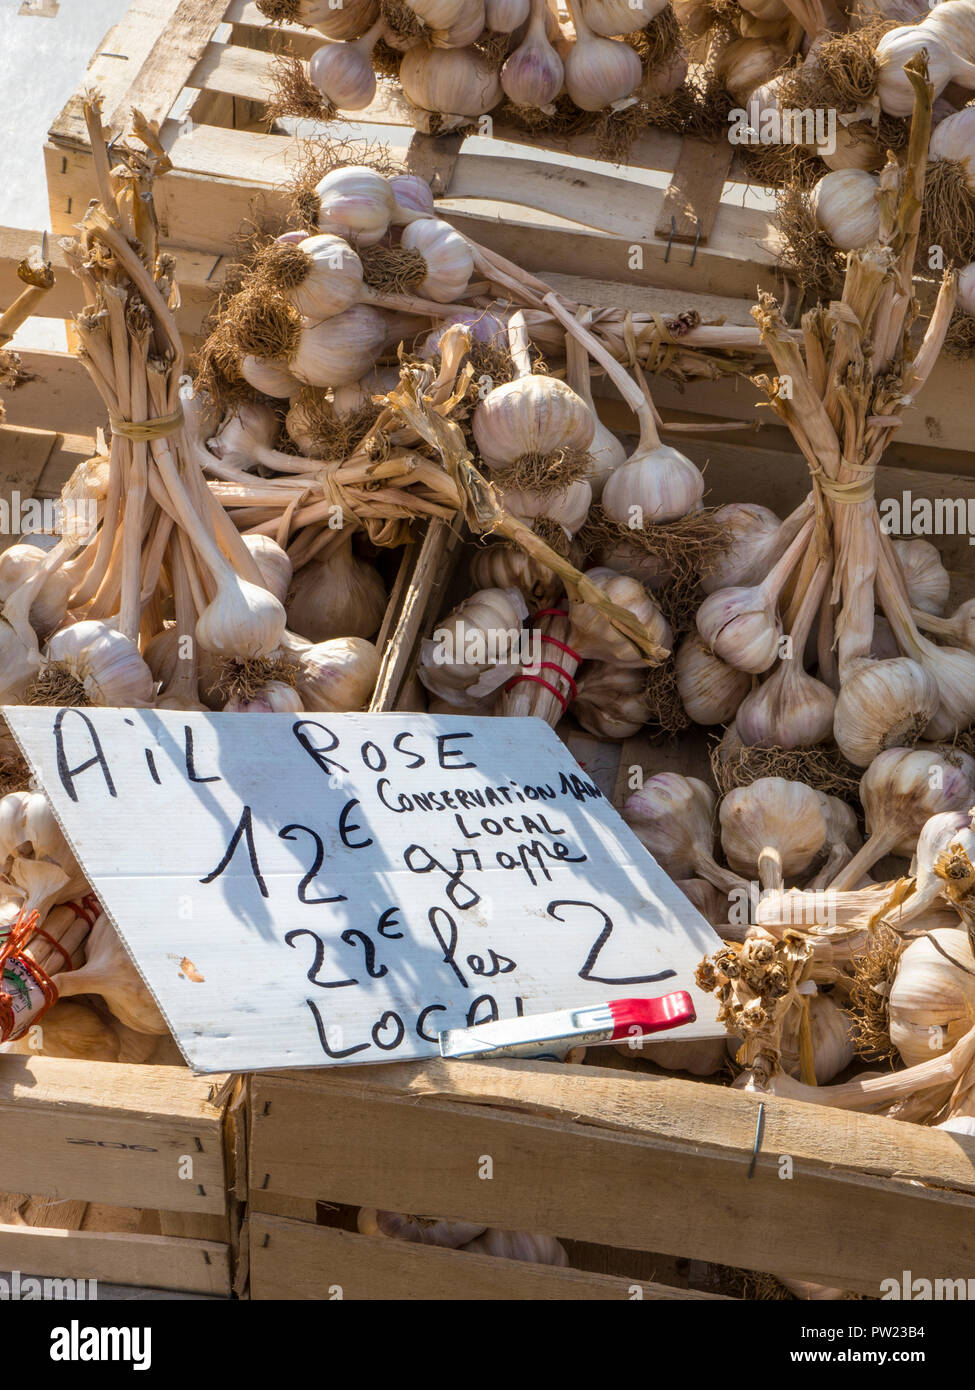 PINK ROSÉ GARLIC AIL LOCAL CONSERVATION MARKET Brittany local Moëlan sur Mer market rustic price label display conservation produce Brittany France Stock Photo